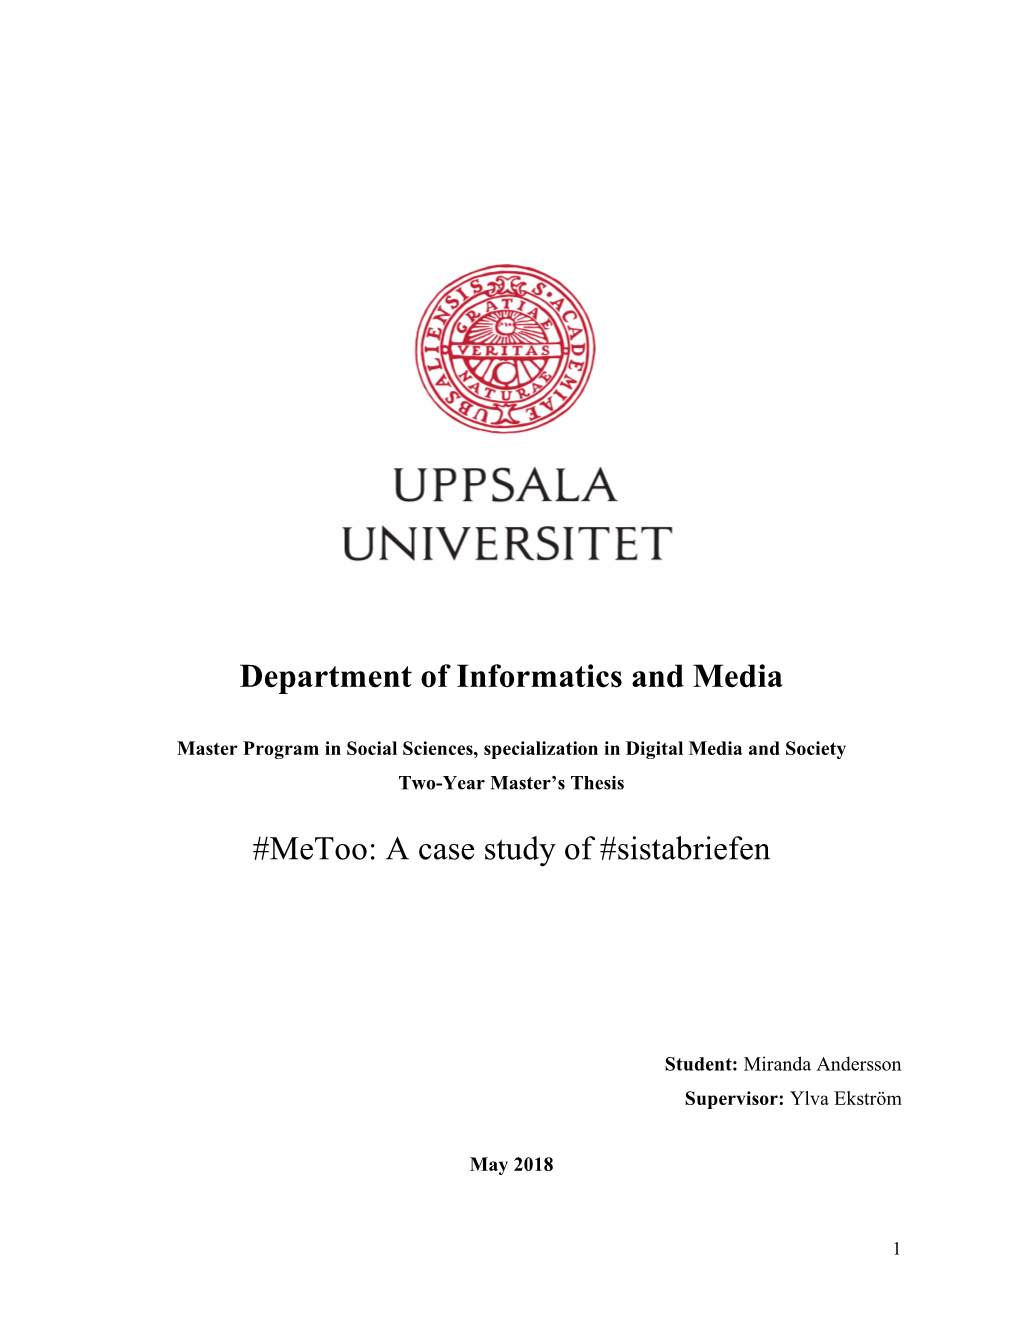 Department of Informatics and Media #Metoo: a Case Study of #Sistabriefen